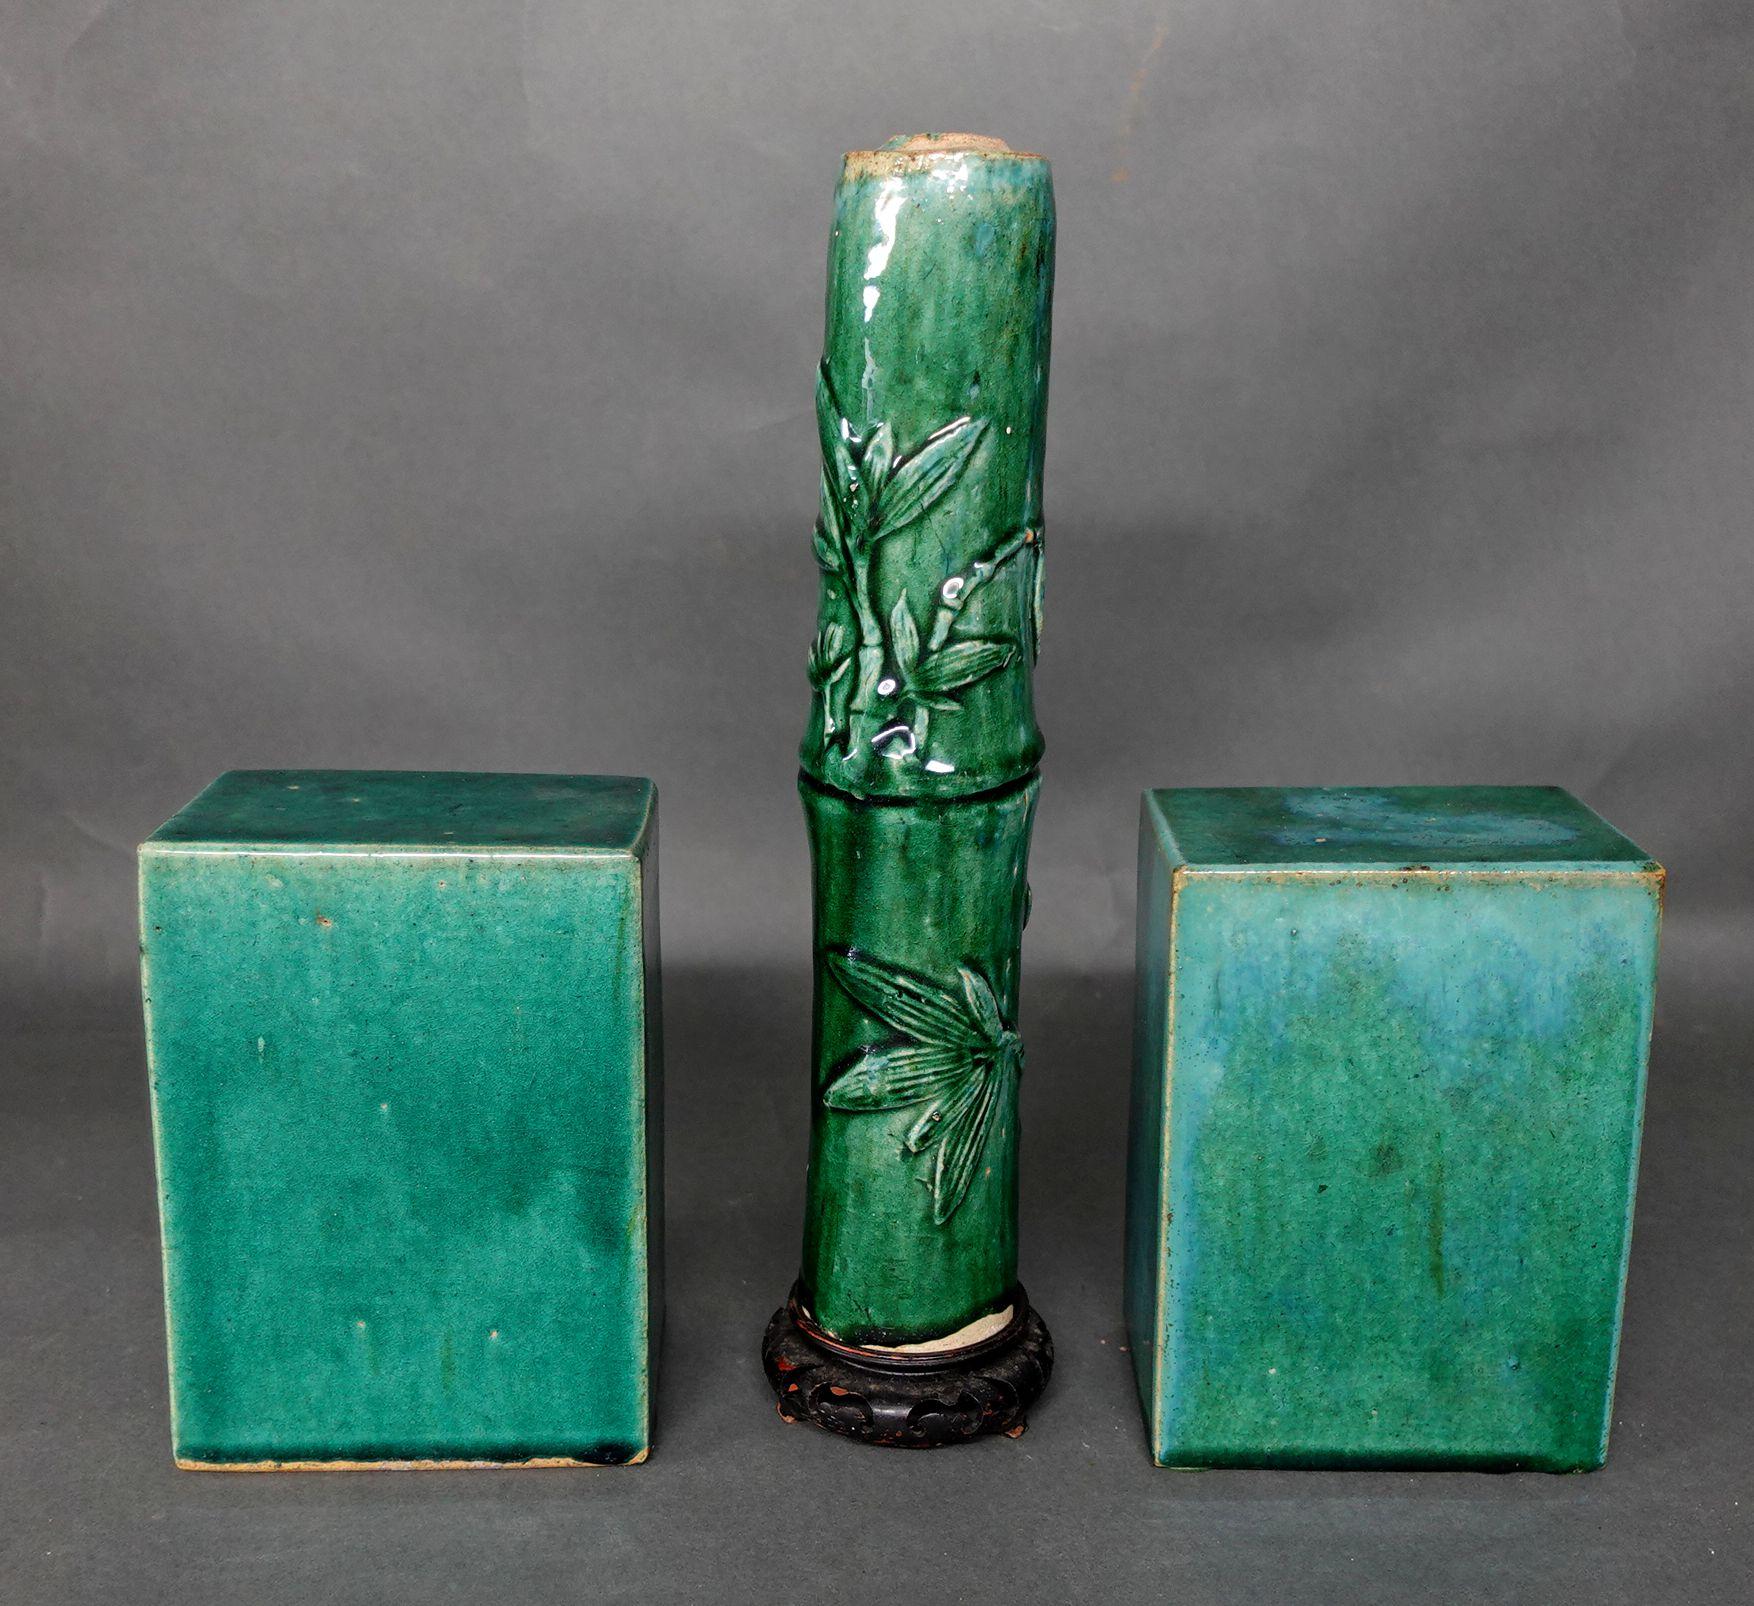 3 Chinese antique with green-glazed, 2 rectangular pillows, bisque bases and interiors, and one carved in bamboo form.
The pillows measured 5.25